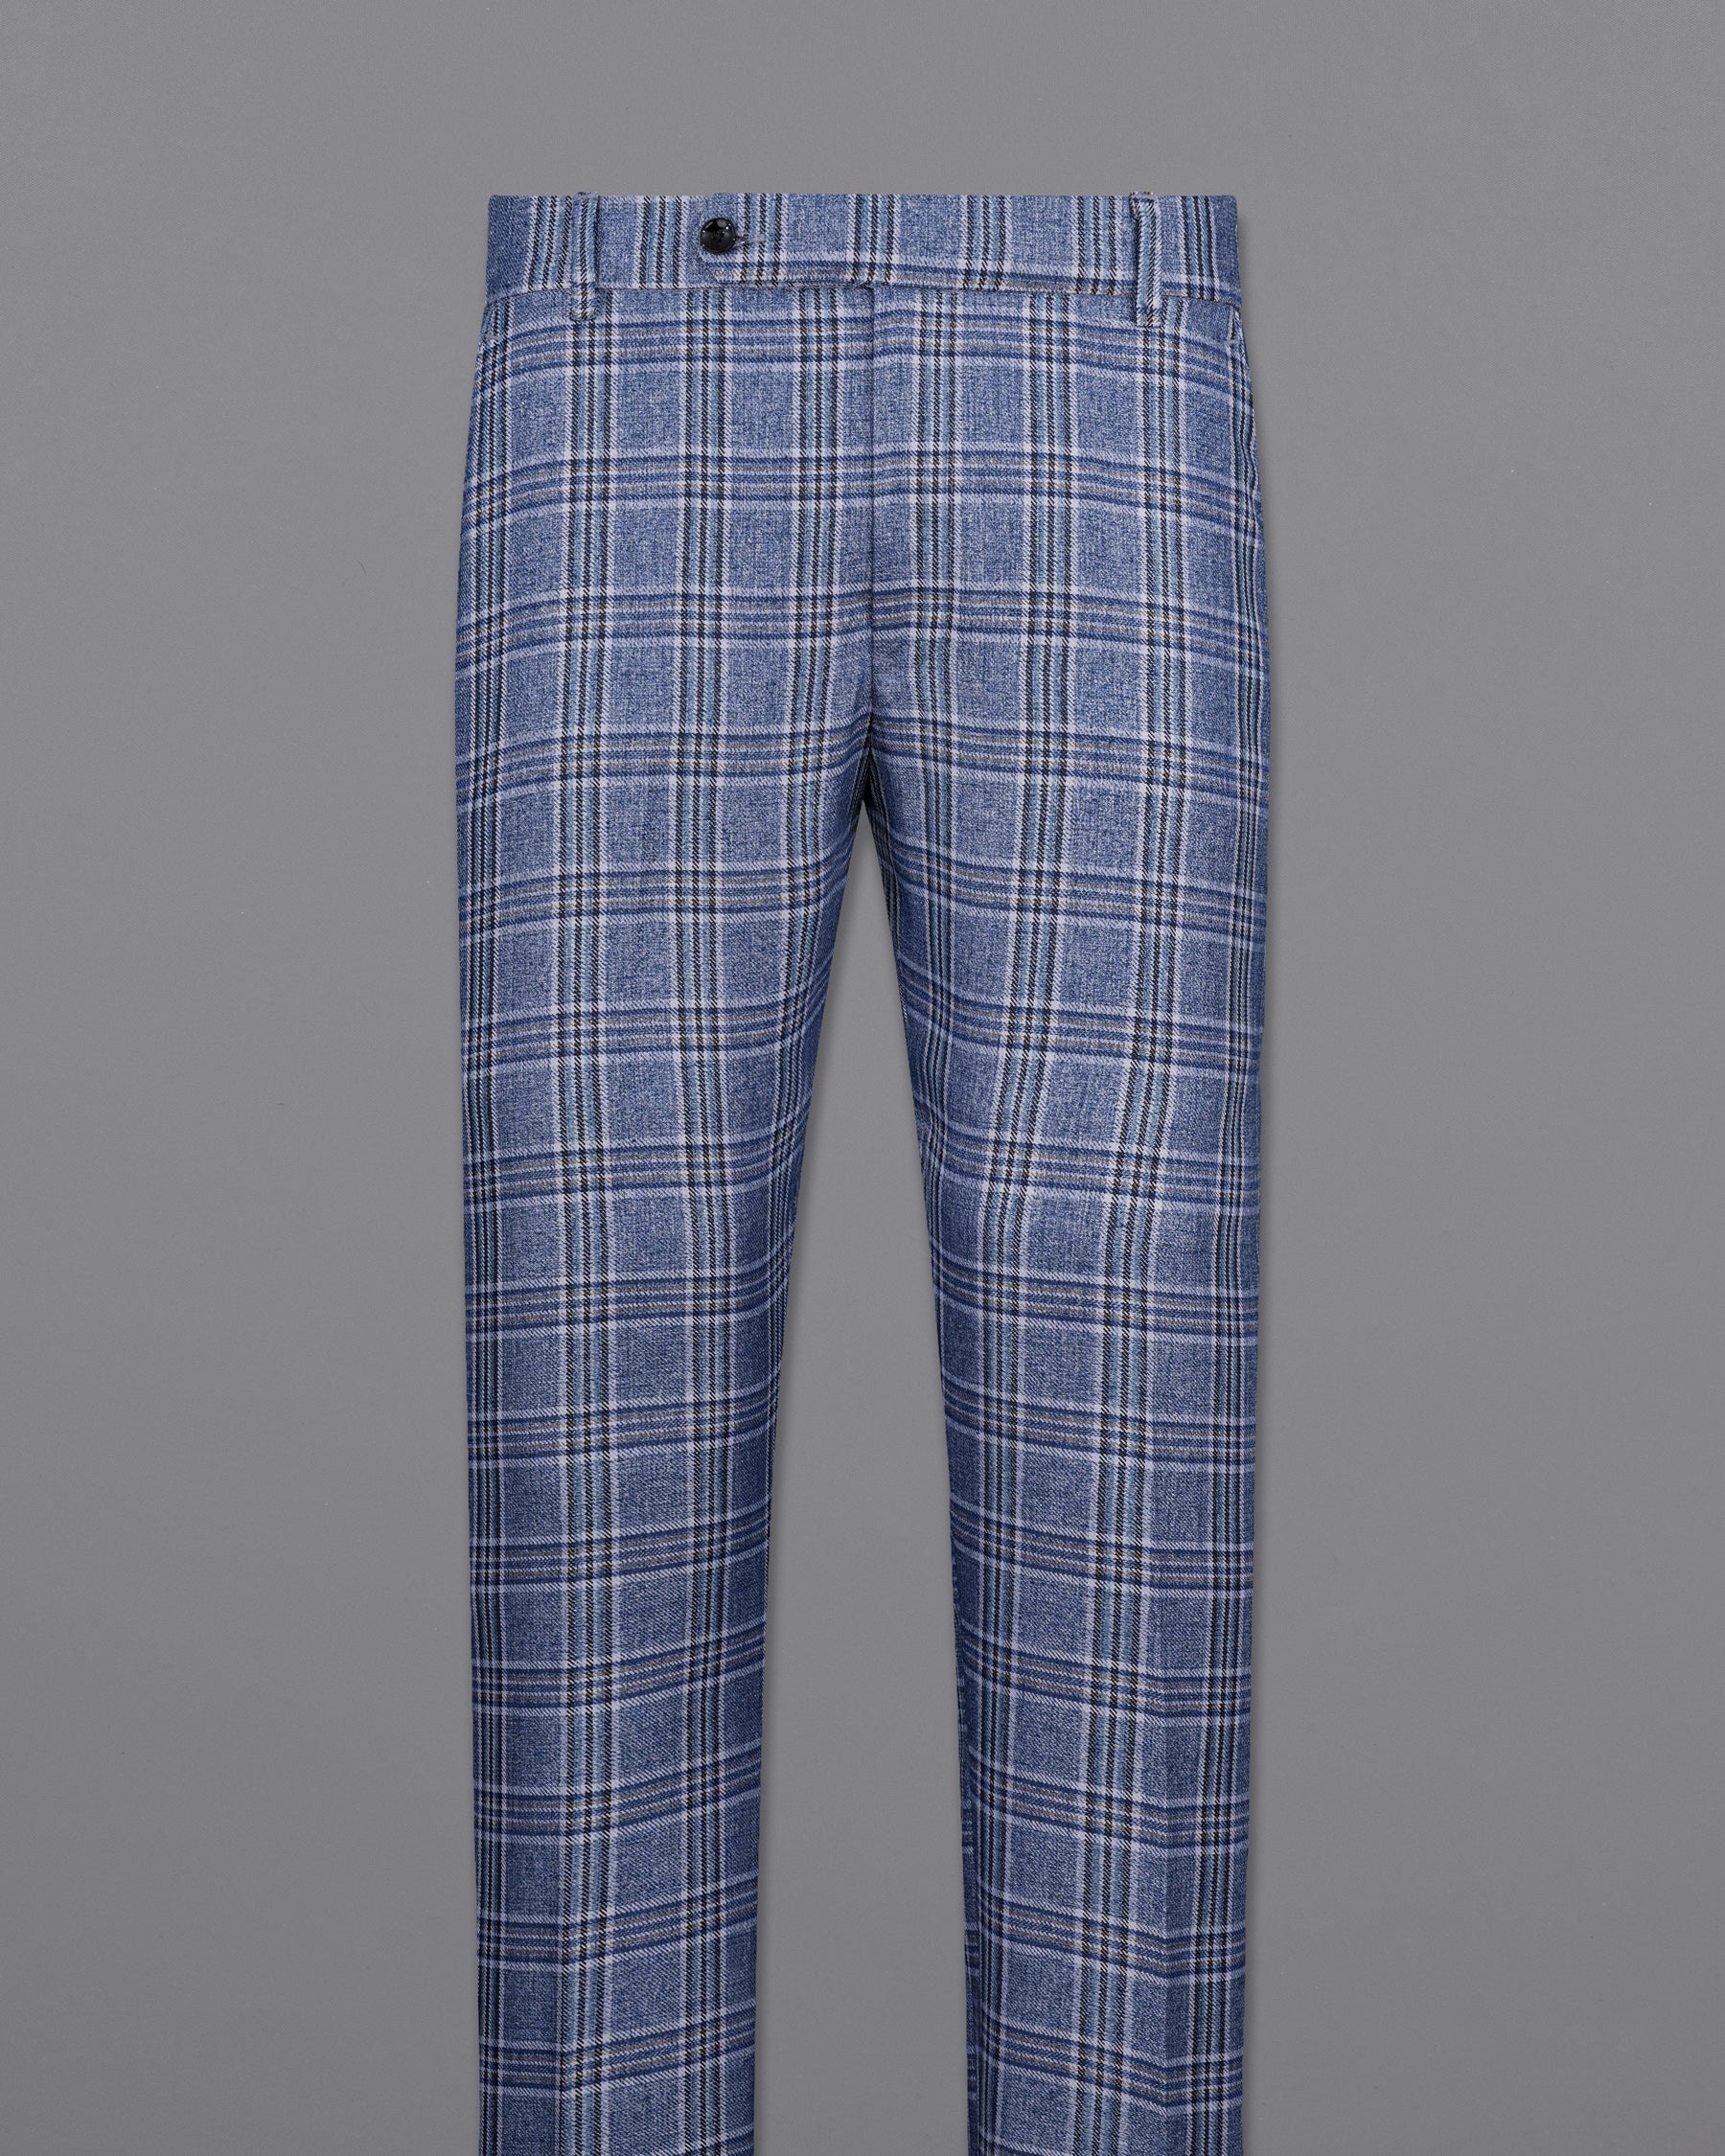 Bayoux Blue Plaid Double Breasted Suit  ST2143-DB-36, ST2143-DB-38, ST2143-DB-40, ST2143-DB-42, ST2143-DB-44, ST2143-DB-46, ST2143-DB-48, ST2143-DB-50, ST2143-DB-52, ST2143-DB-54, ST2143-DB-56, ST2143-DB-58, ST2143-DB-60
